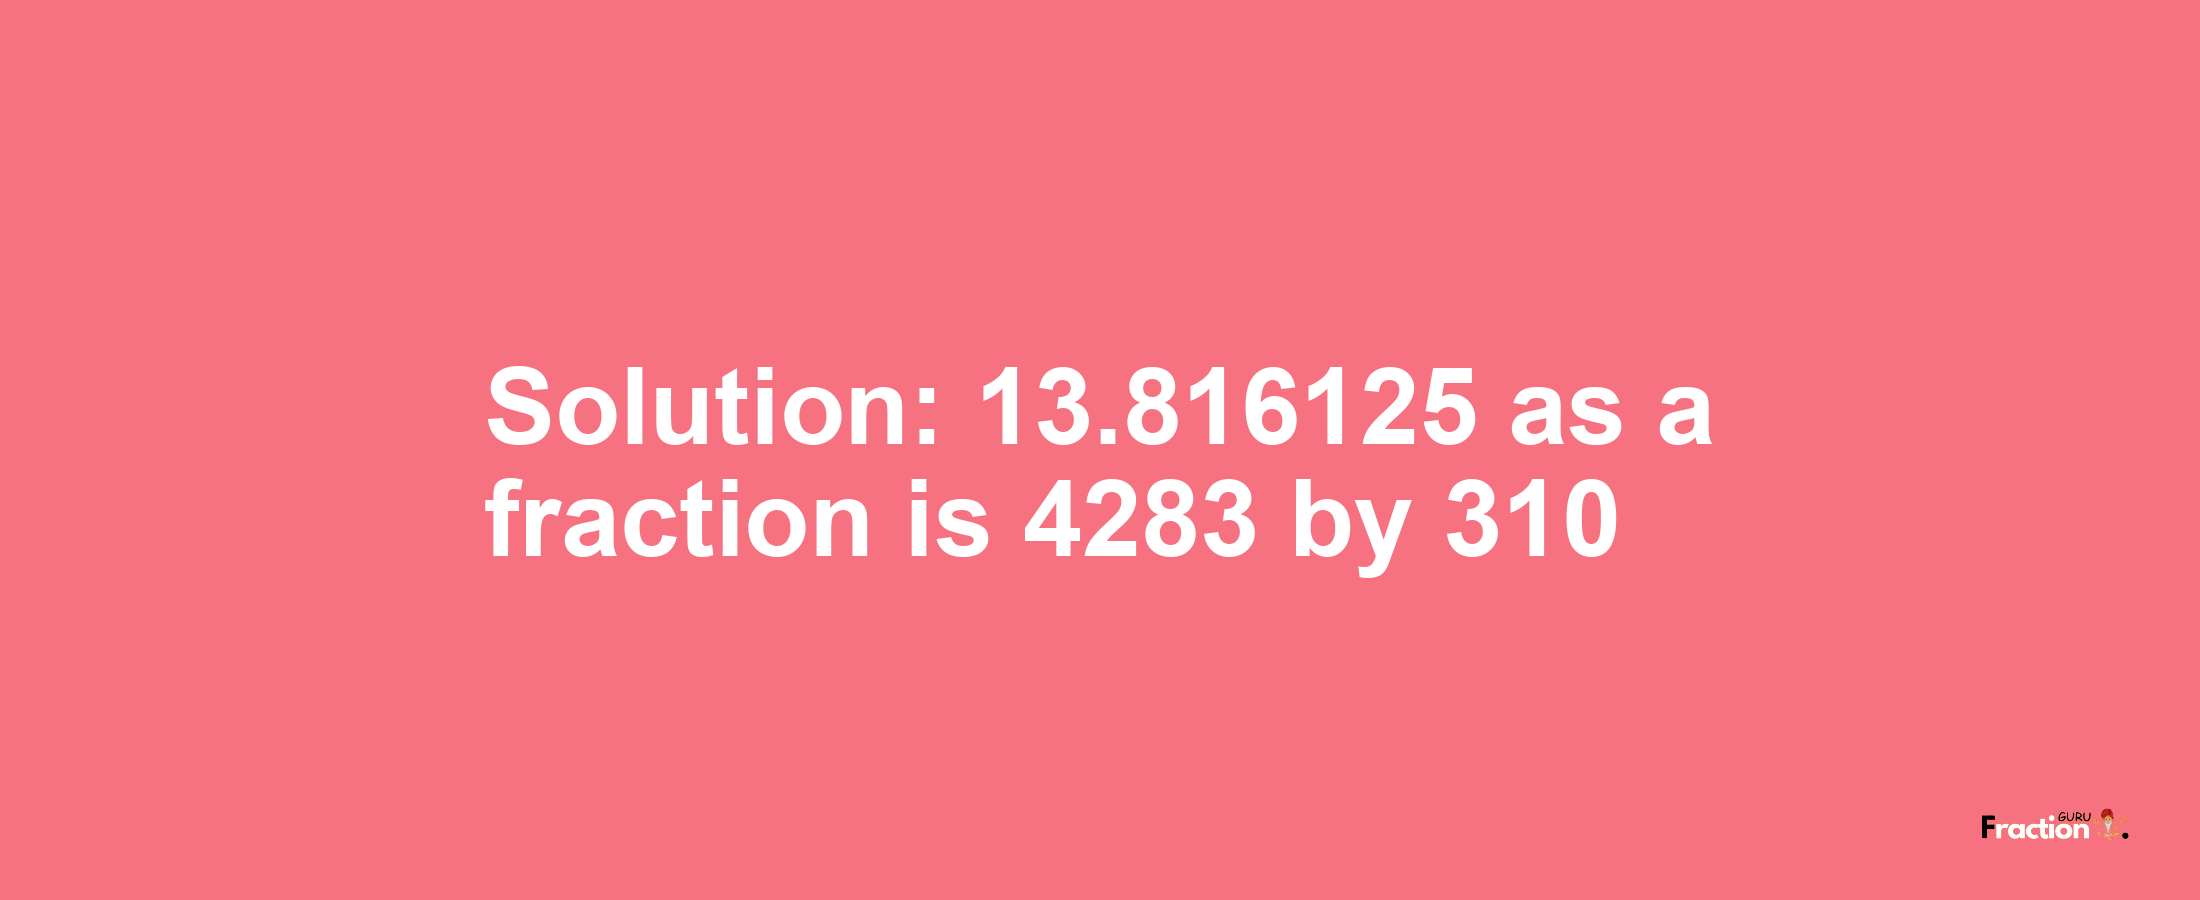 Solution:13.816125 as a fraction is 4283/310